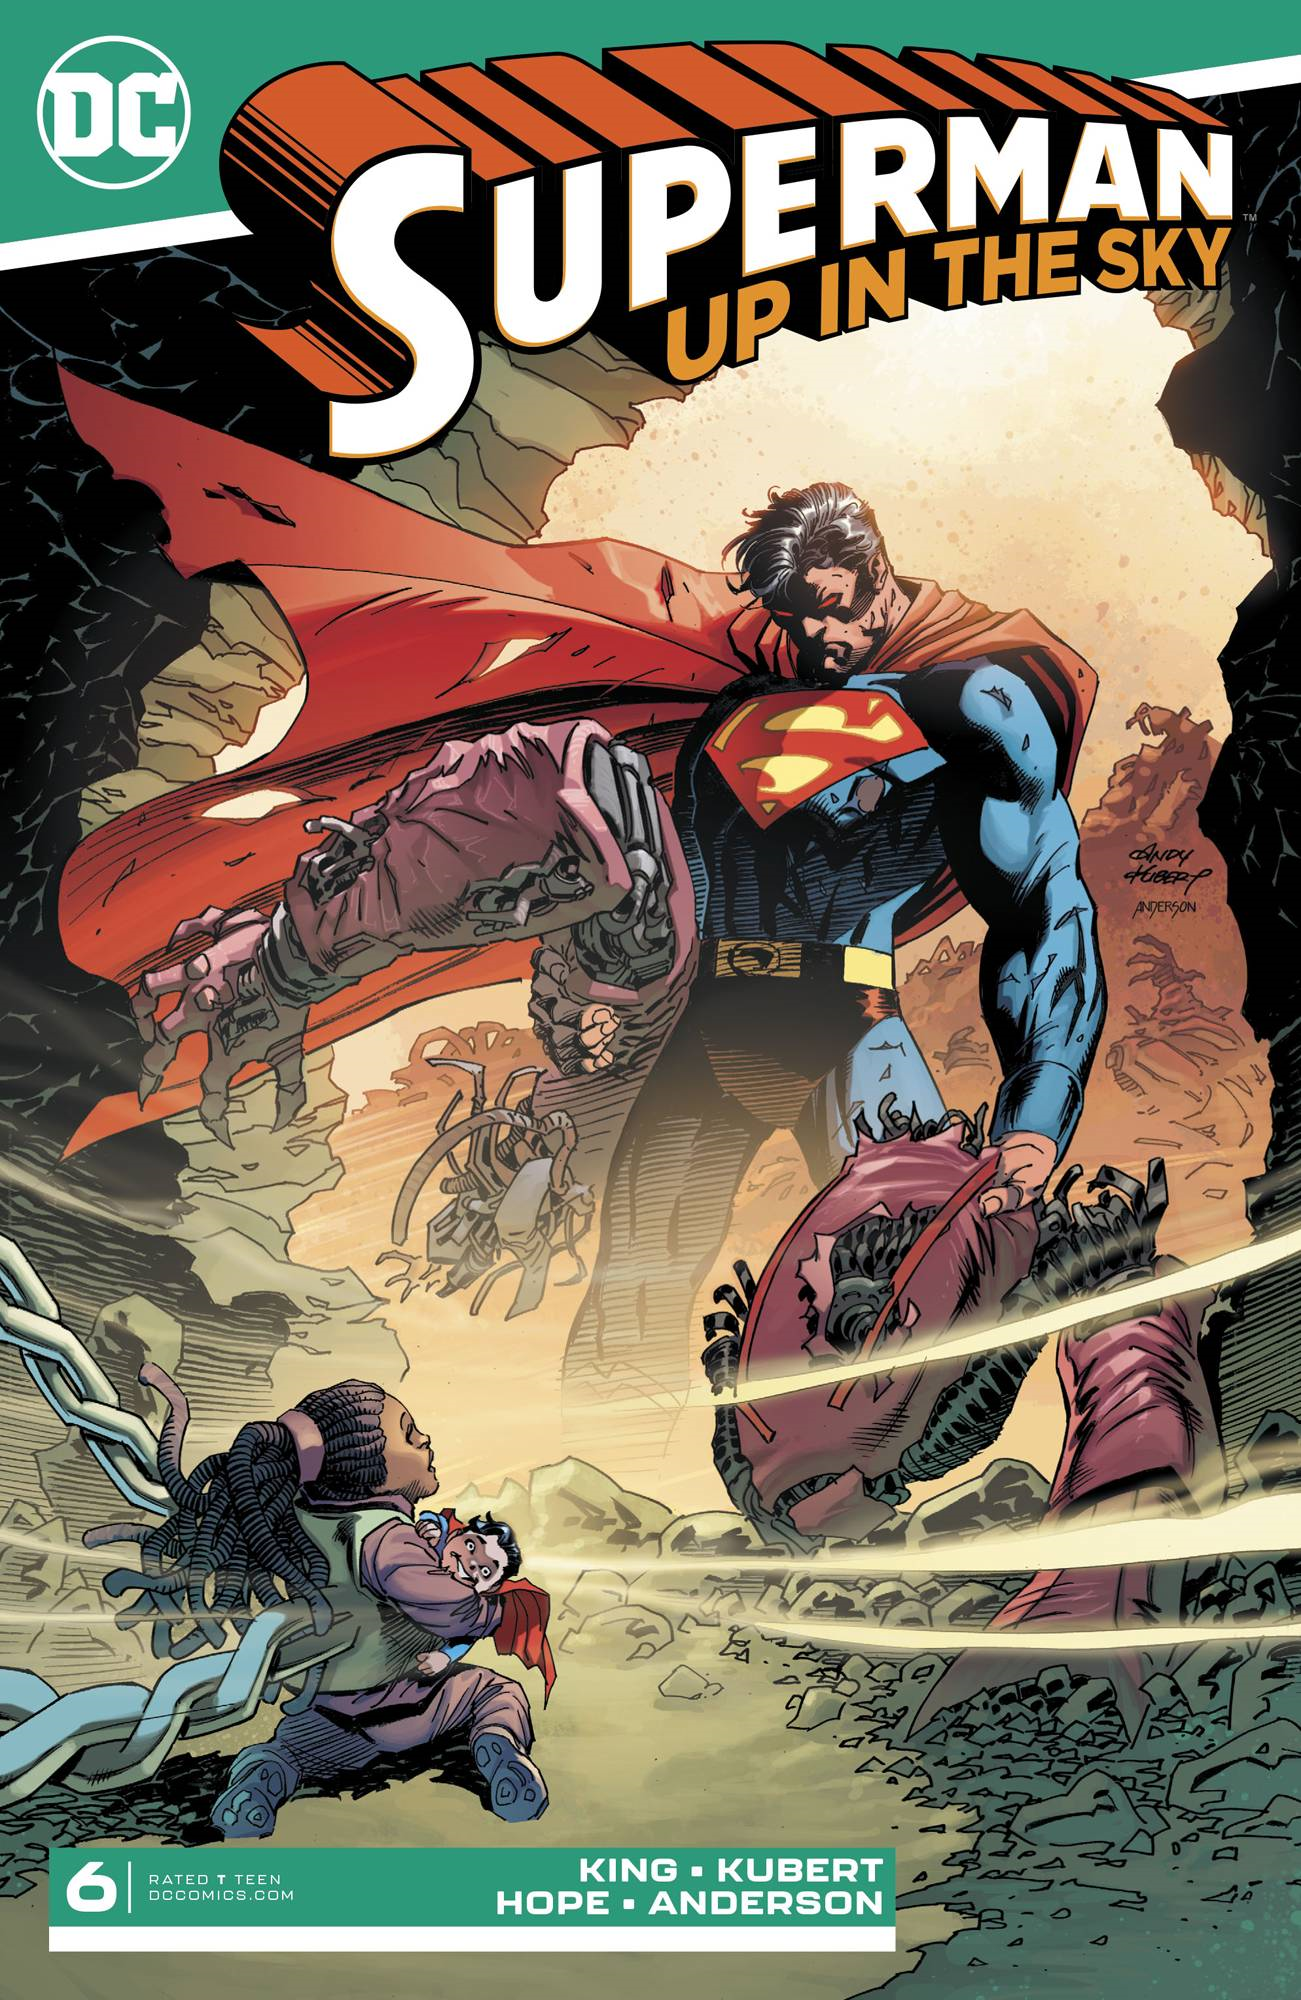 COMIC SUPERMAN UP IN THE SKY #6 (OF 6) DC COMICS